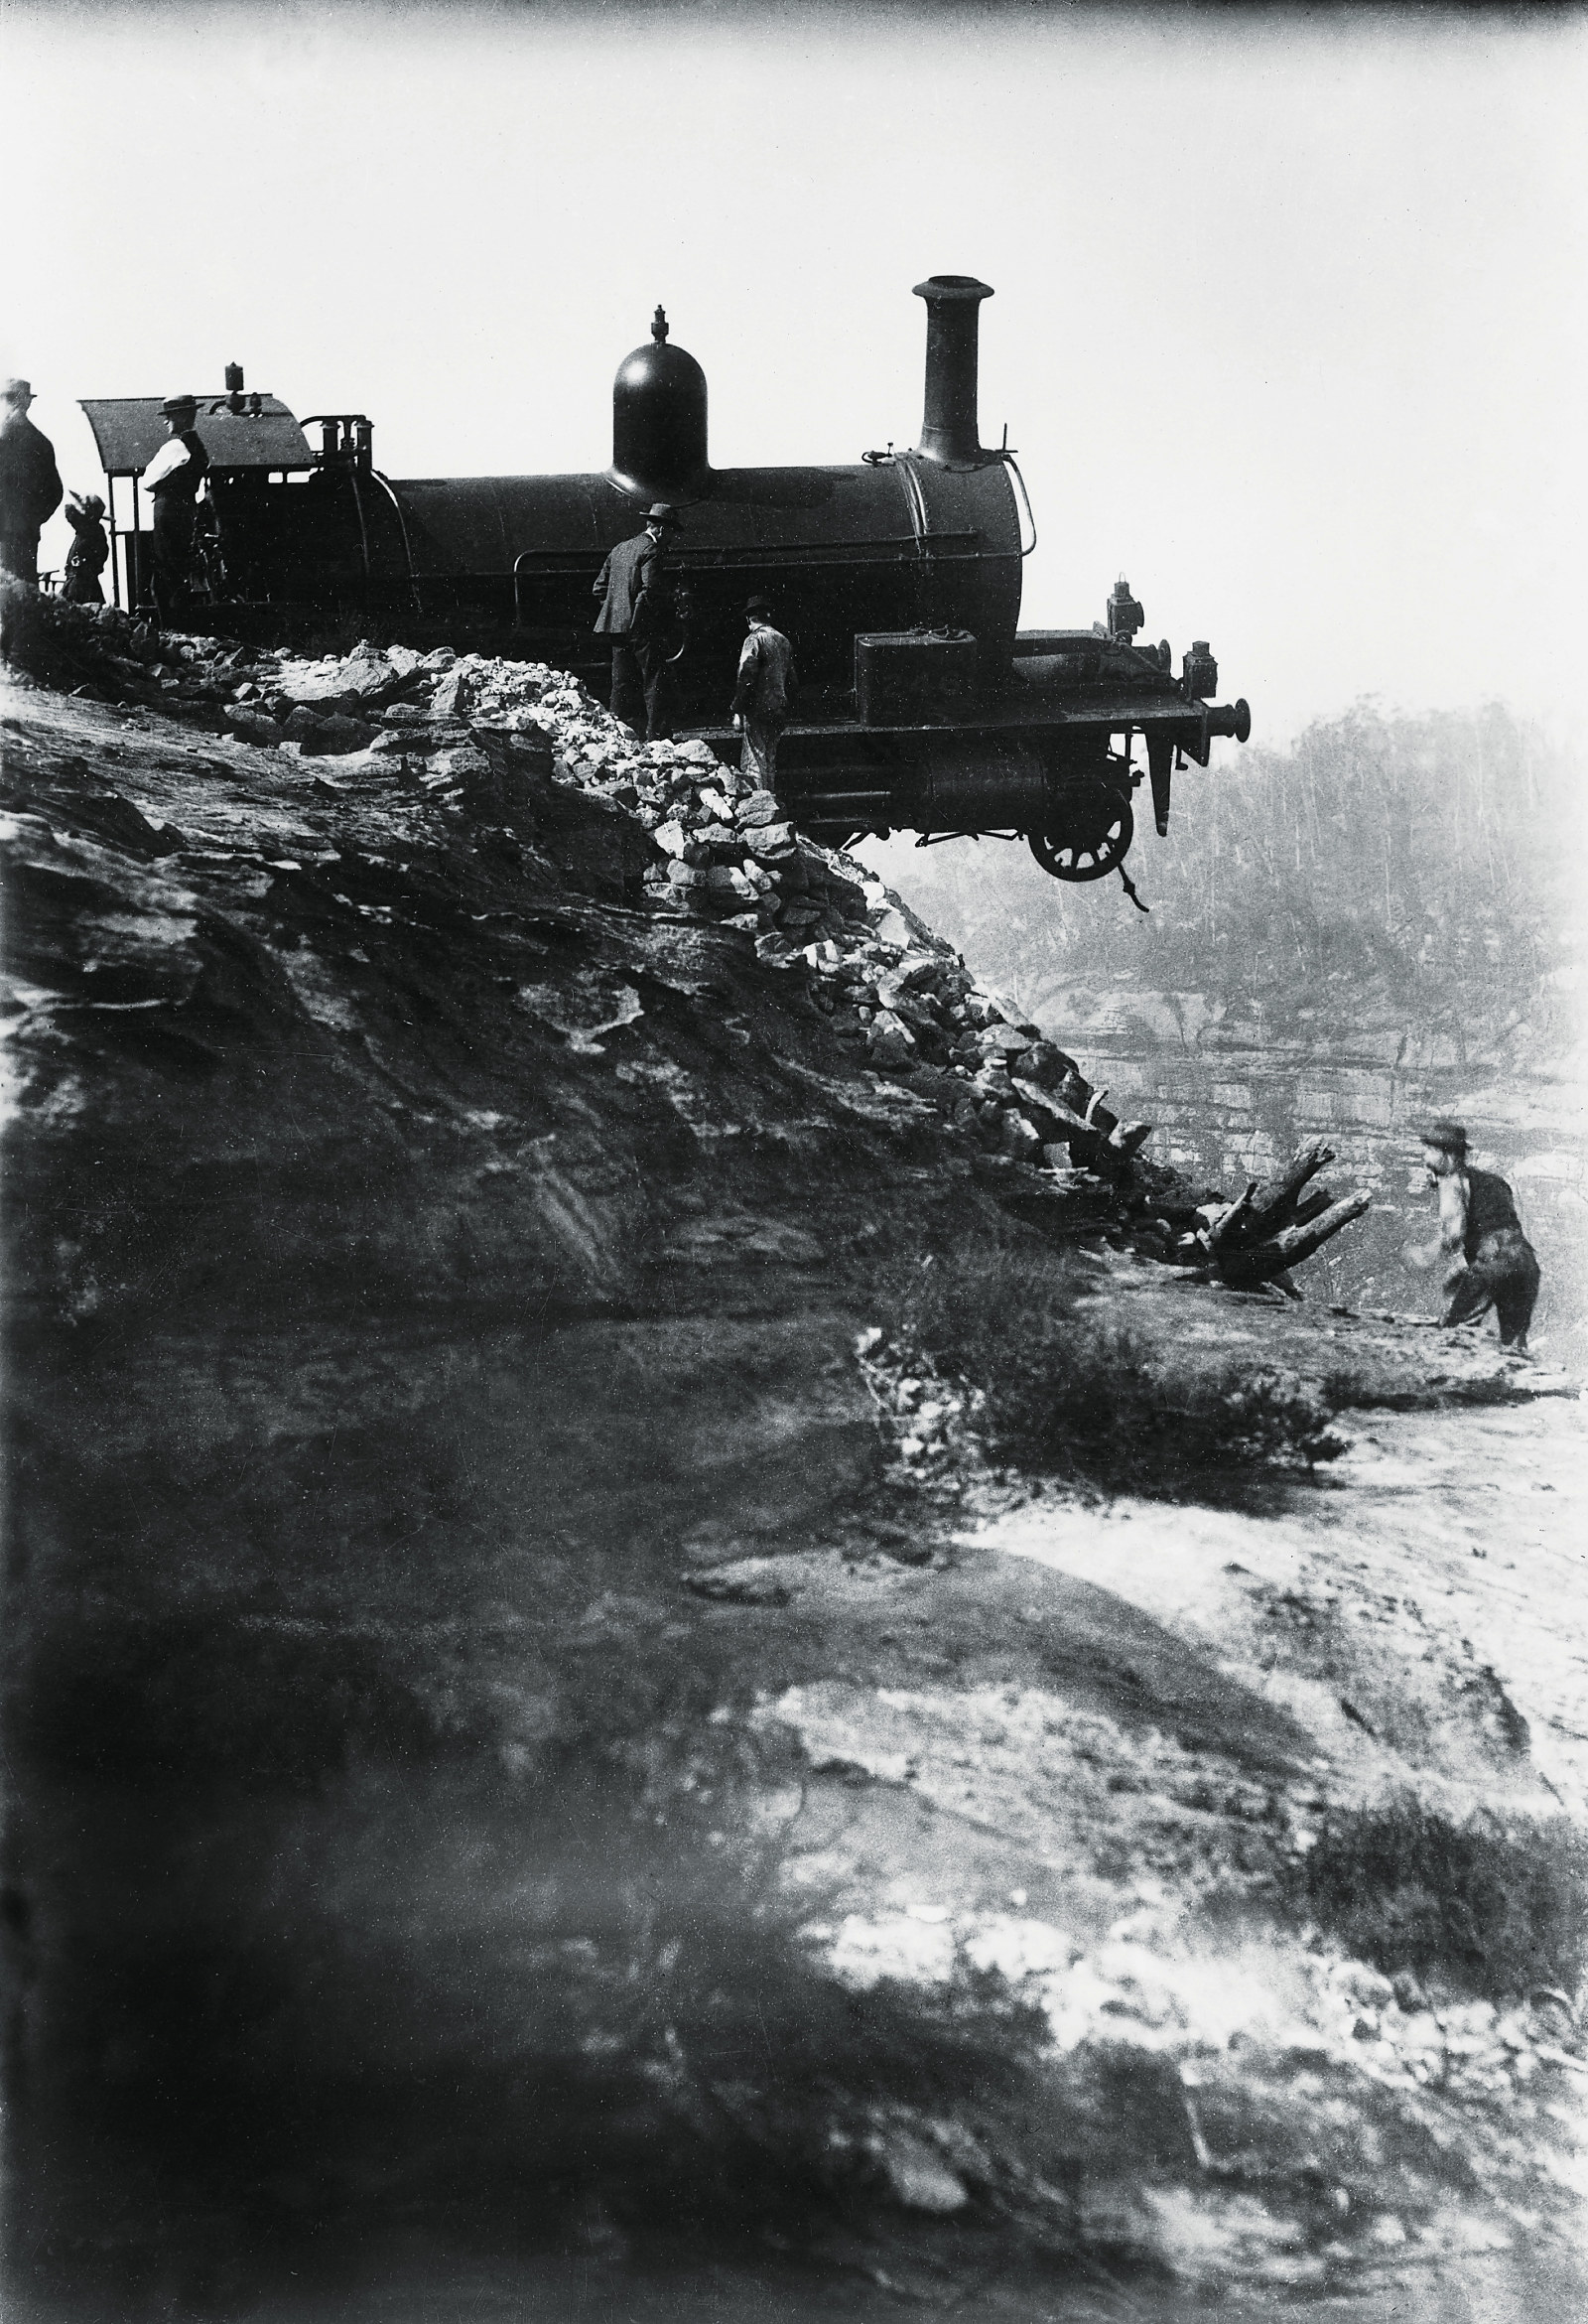 a derailed goods train to the Zig Zag railway line near Lithgow, on the Central Tablelands of NSW. 1901.